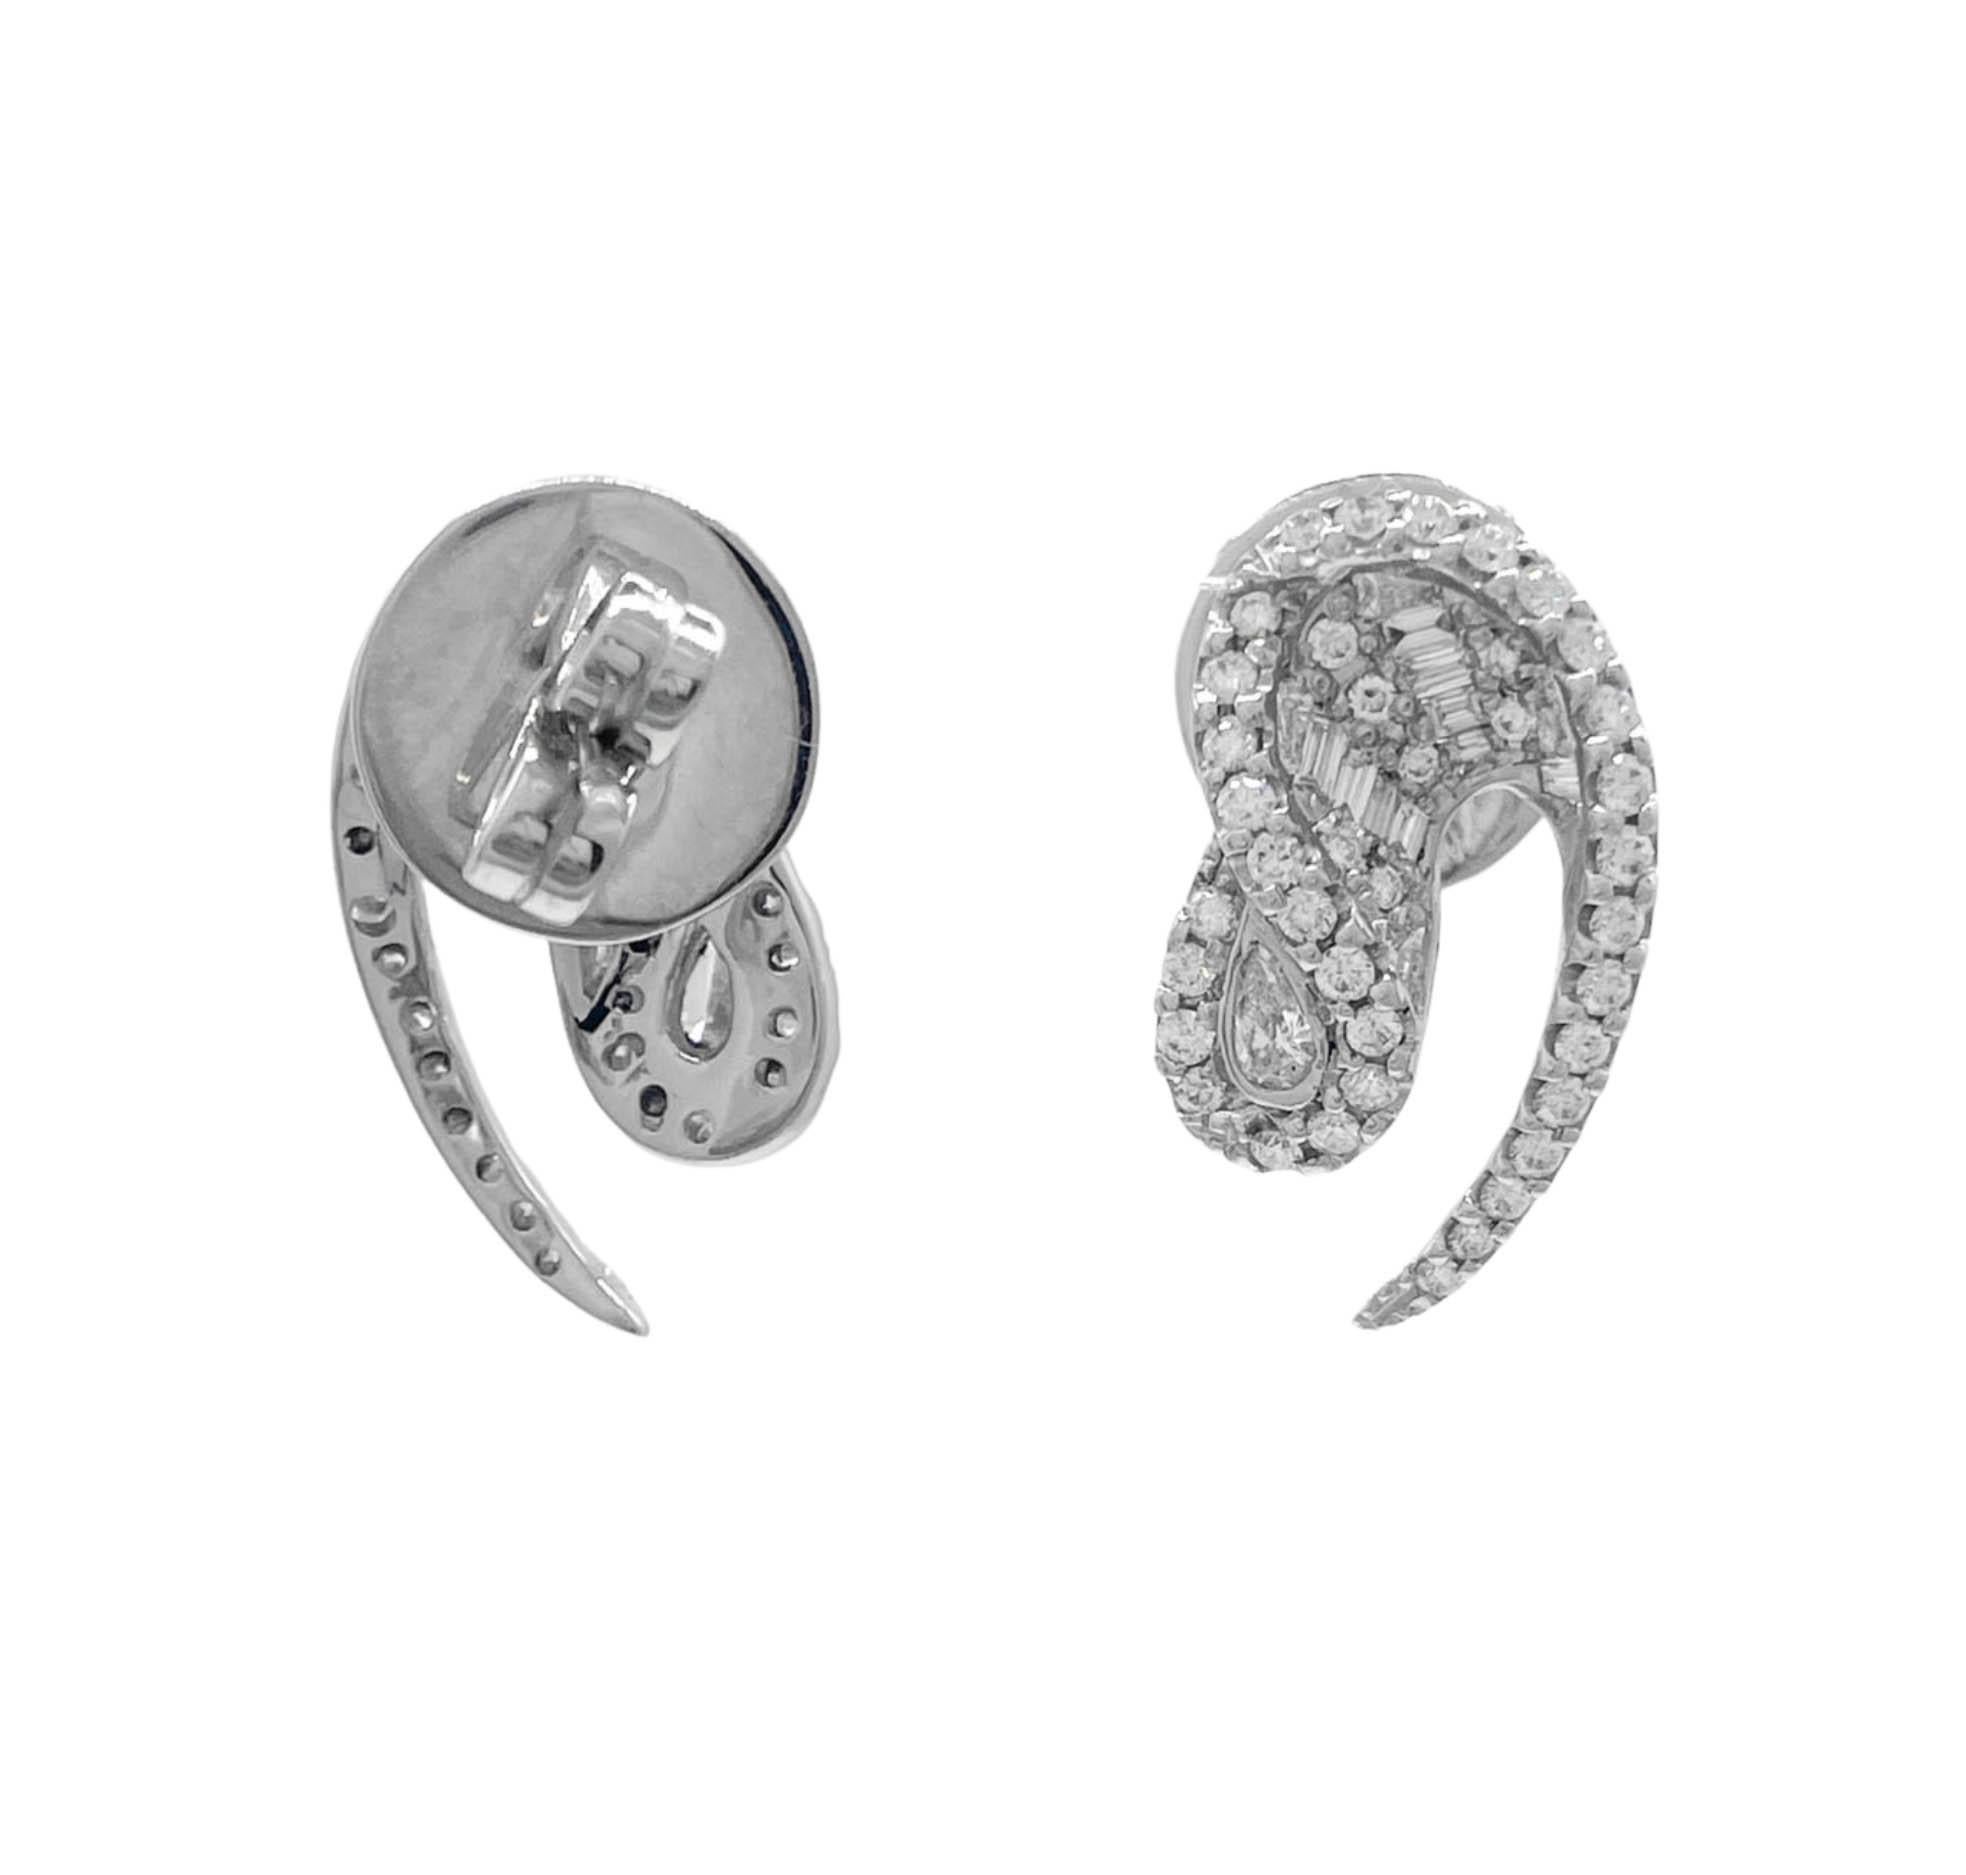 Kavant & Sharart 18k White Gold Diamond Talay Wave Earrings In Good Condition For Sale In Boca Raton, FL